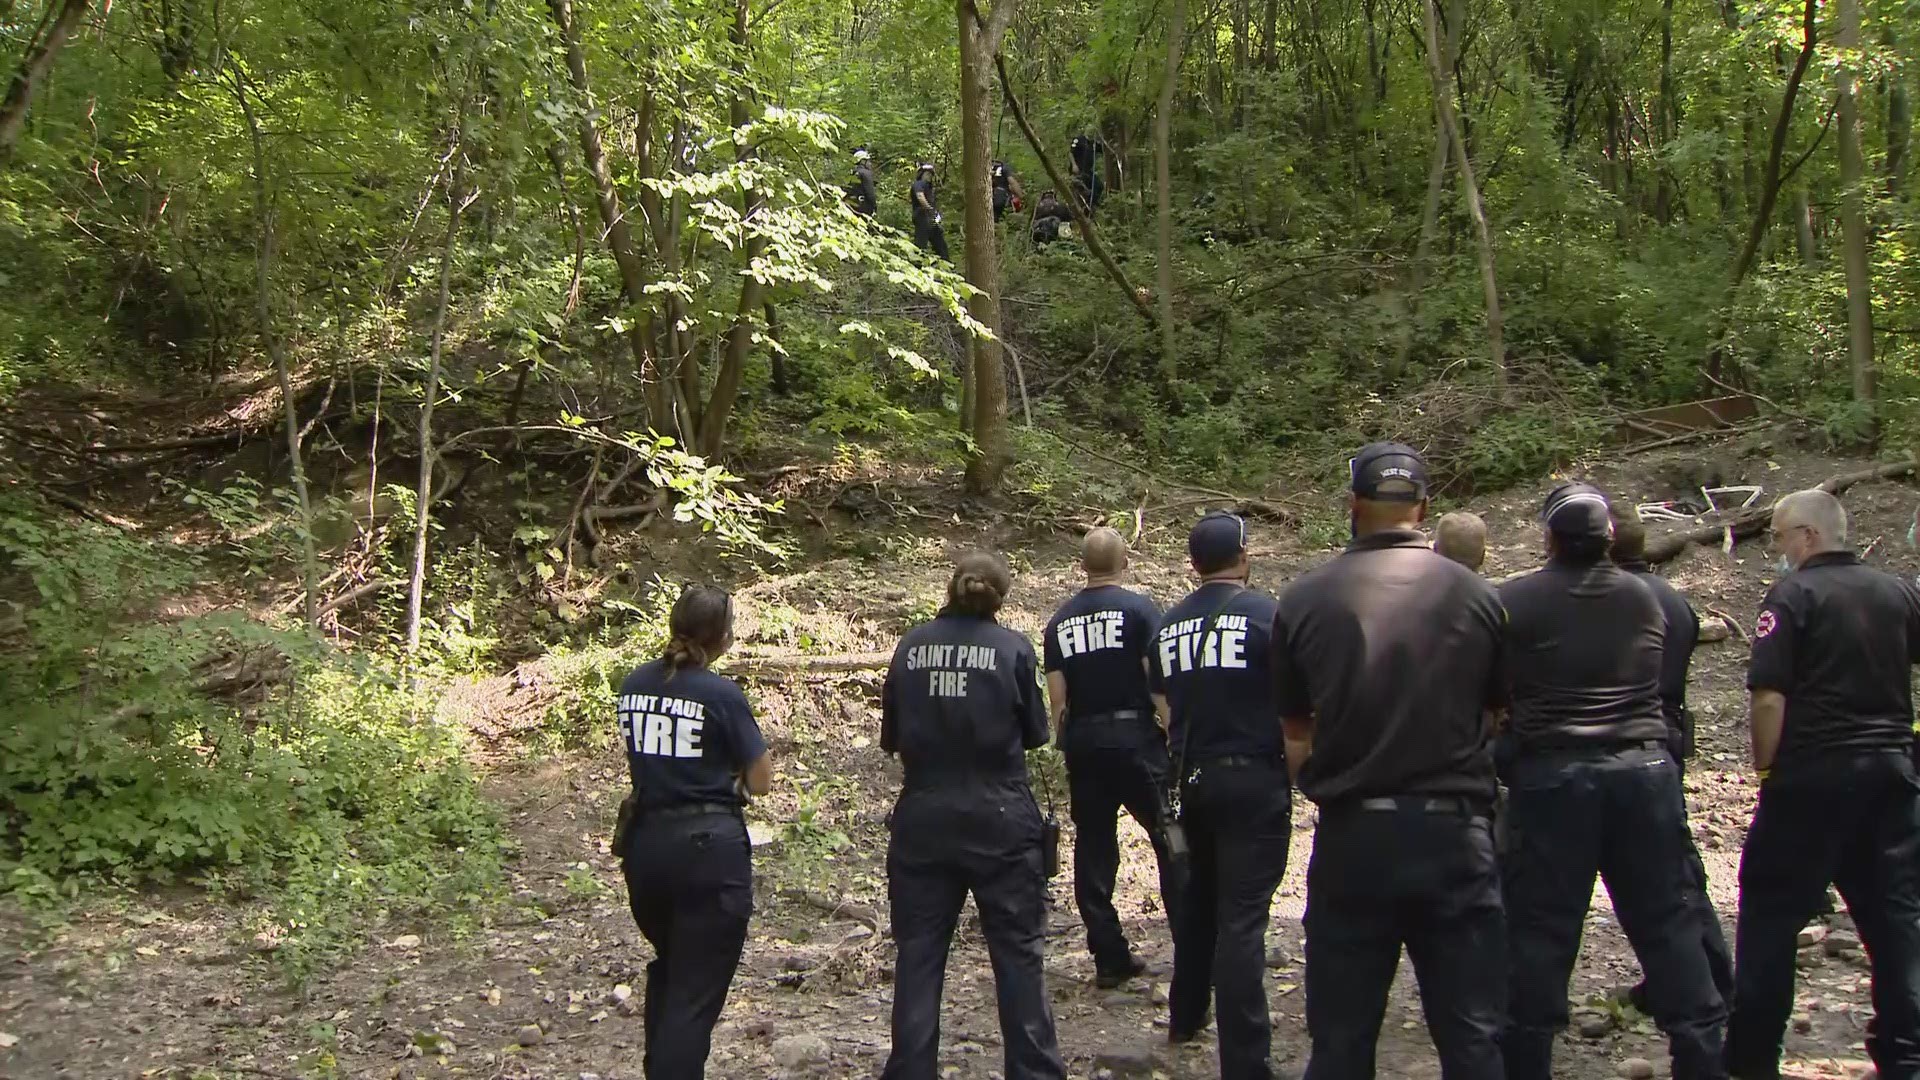 Crews successfully reached a person located about 30 feet inside a cave.